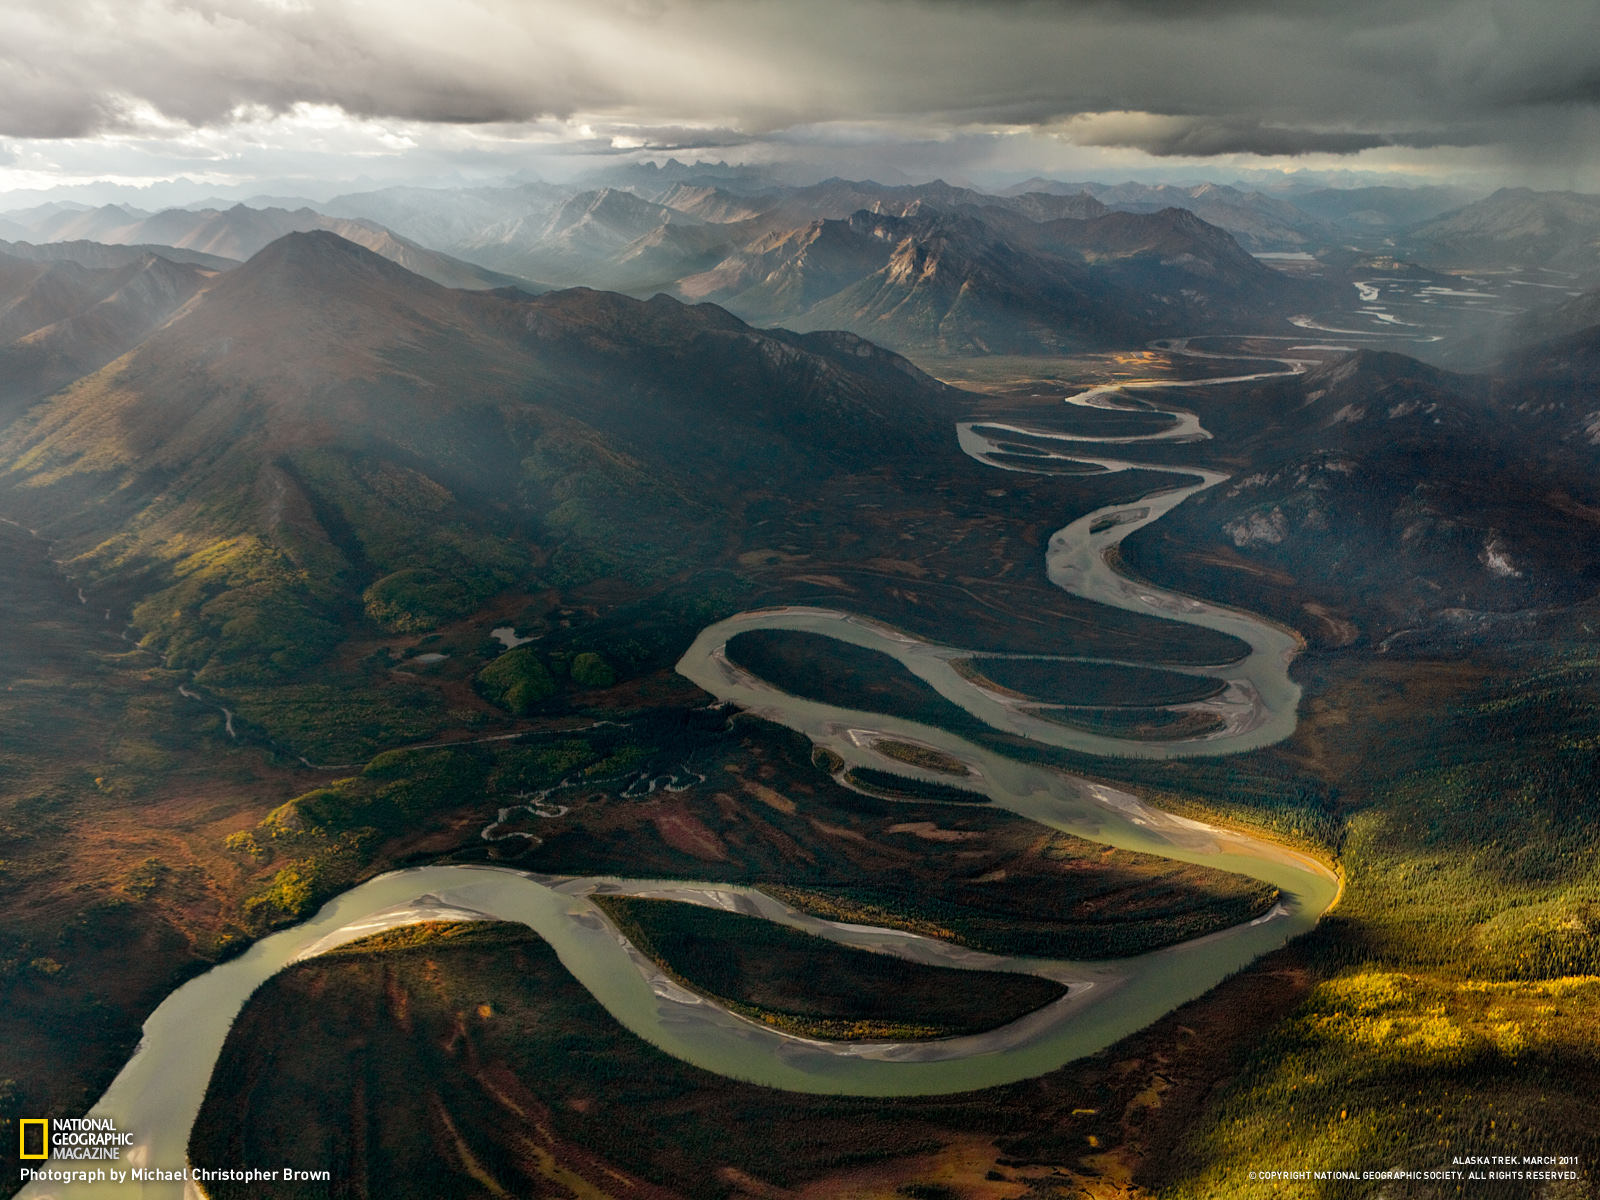    National Park Wallpaper   National Geographic Photo of the Day